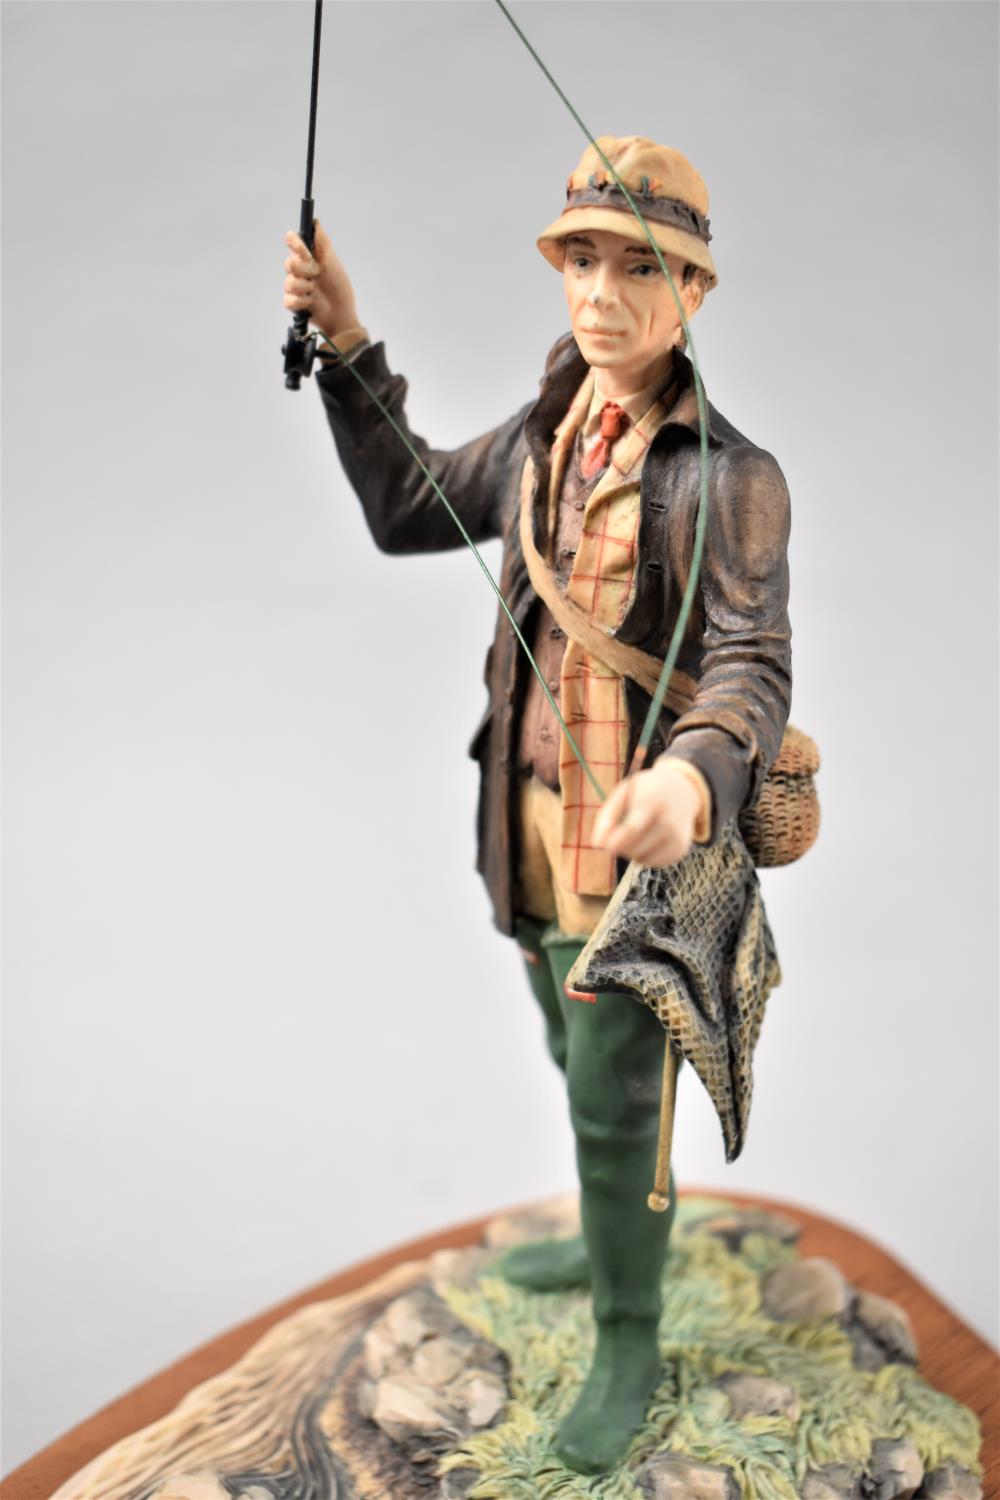 A Border Fine Arts Study of a Fly Fisherman, Model No.110 by David Geenty on Oval Wooden Base - Image 2 of 3